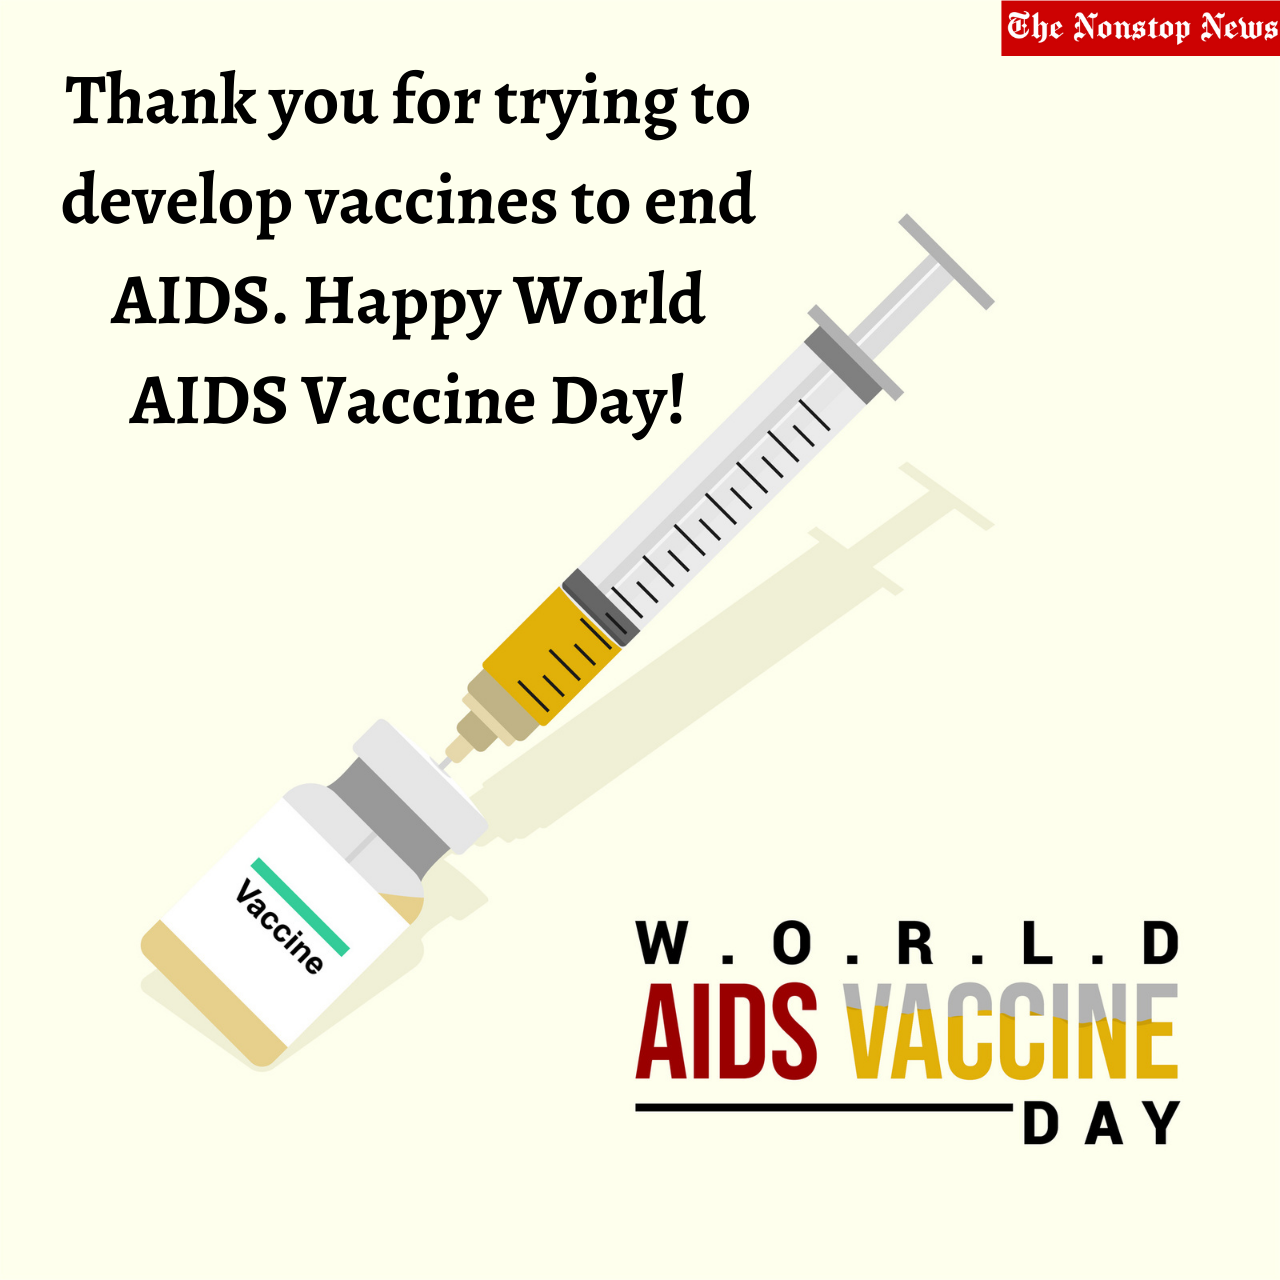 World AIDS Vaccine Day 2022: Top Quotes, HD Images, Messages, Slogans, Posters To promote the continued urgent need for a vaccine to prevent HIV infection and AIDS